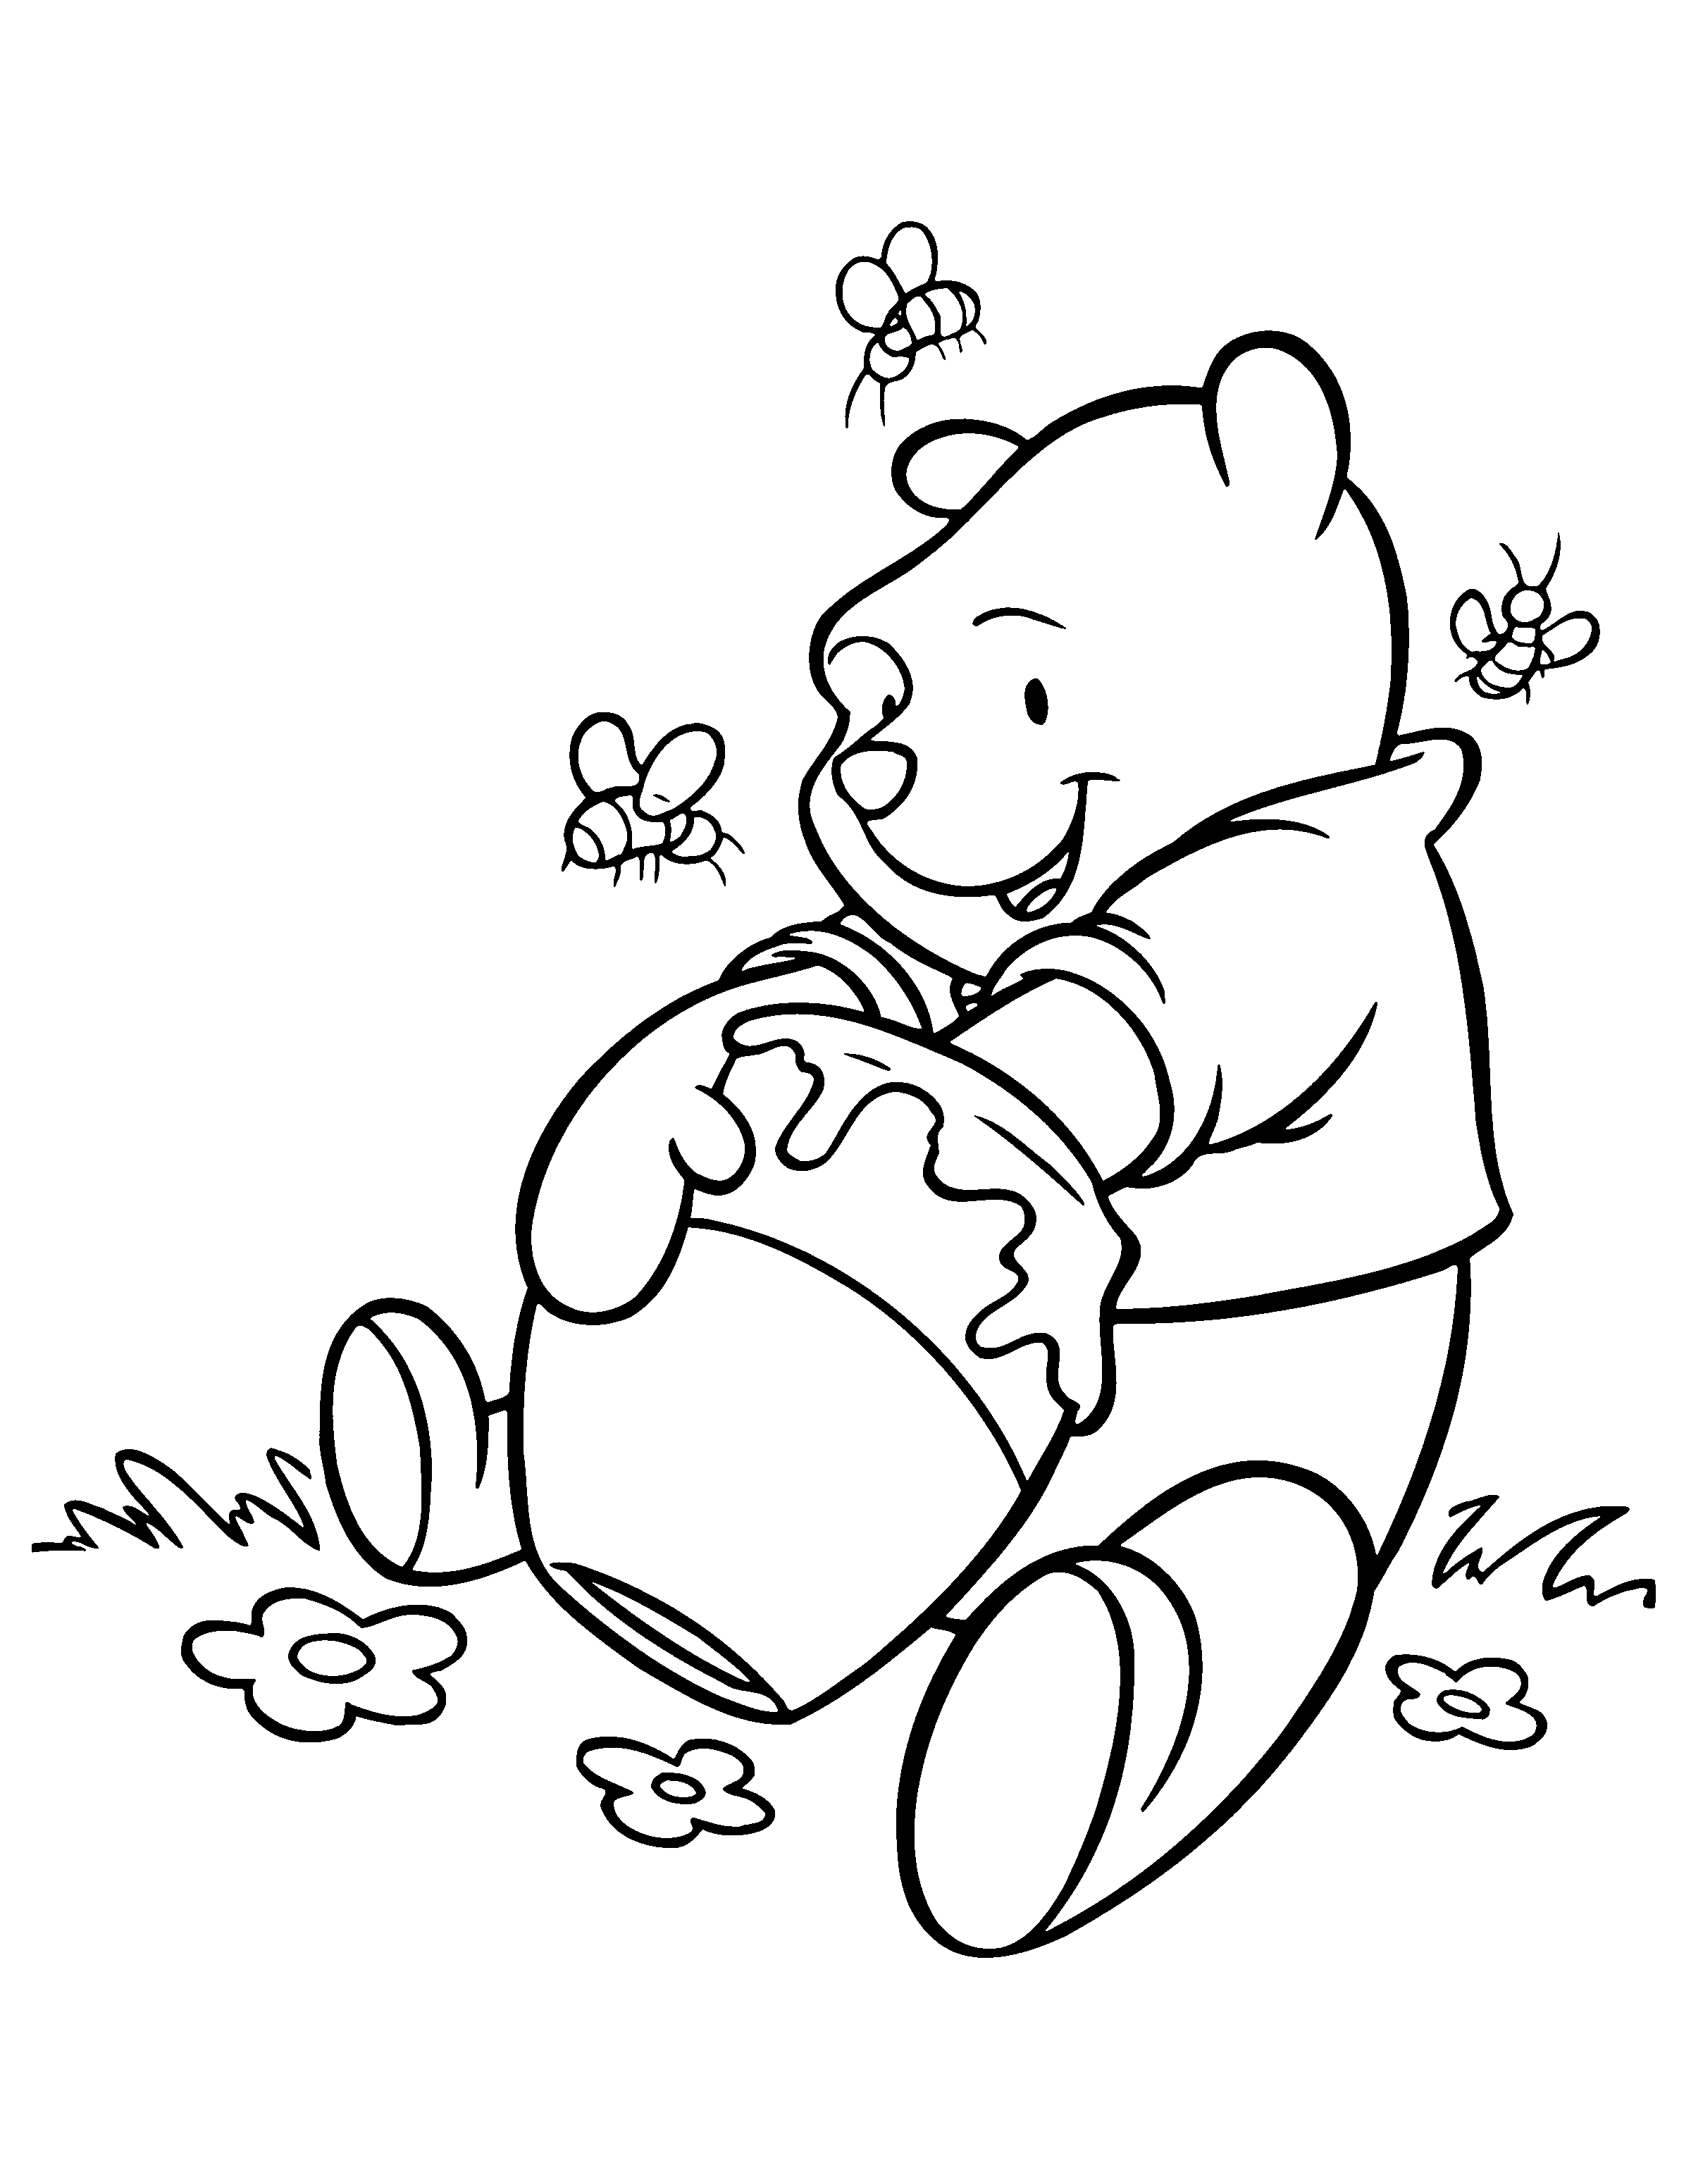 free winnie the pooh coloring pages free printable winnie the pooh coloring pages for kids winnie pooh pages coloring the free 